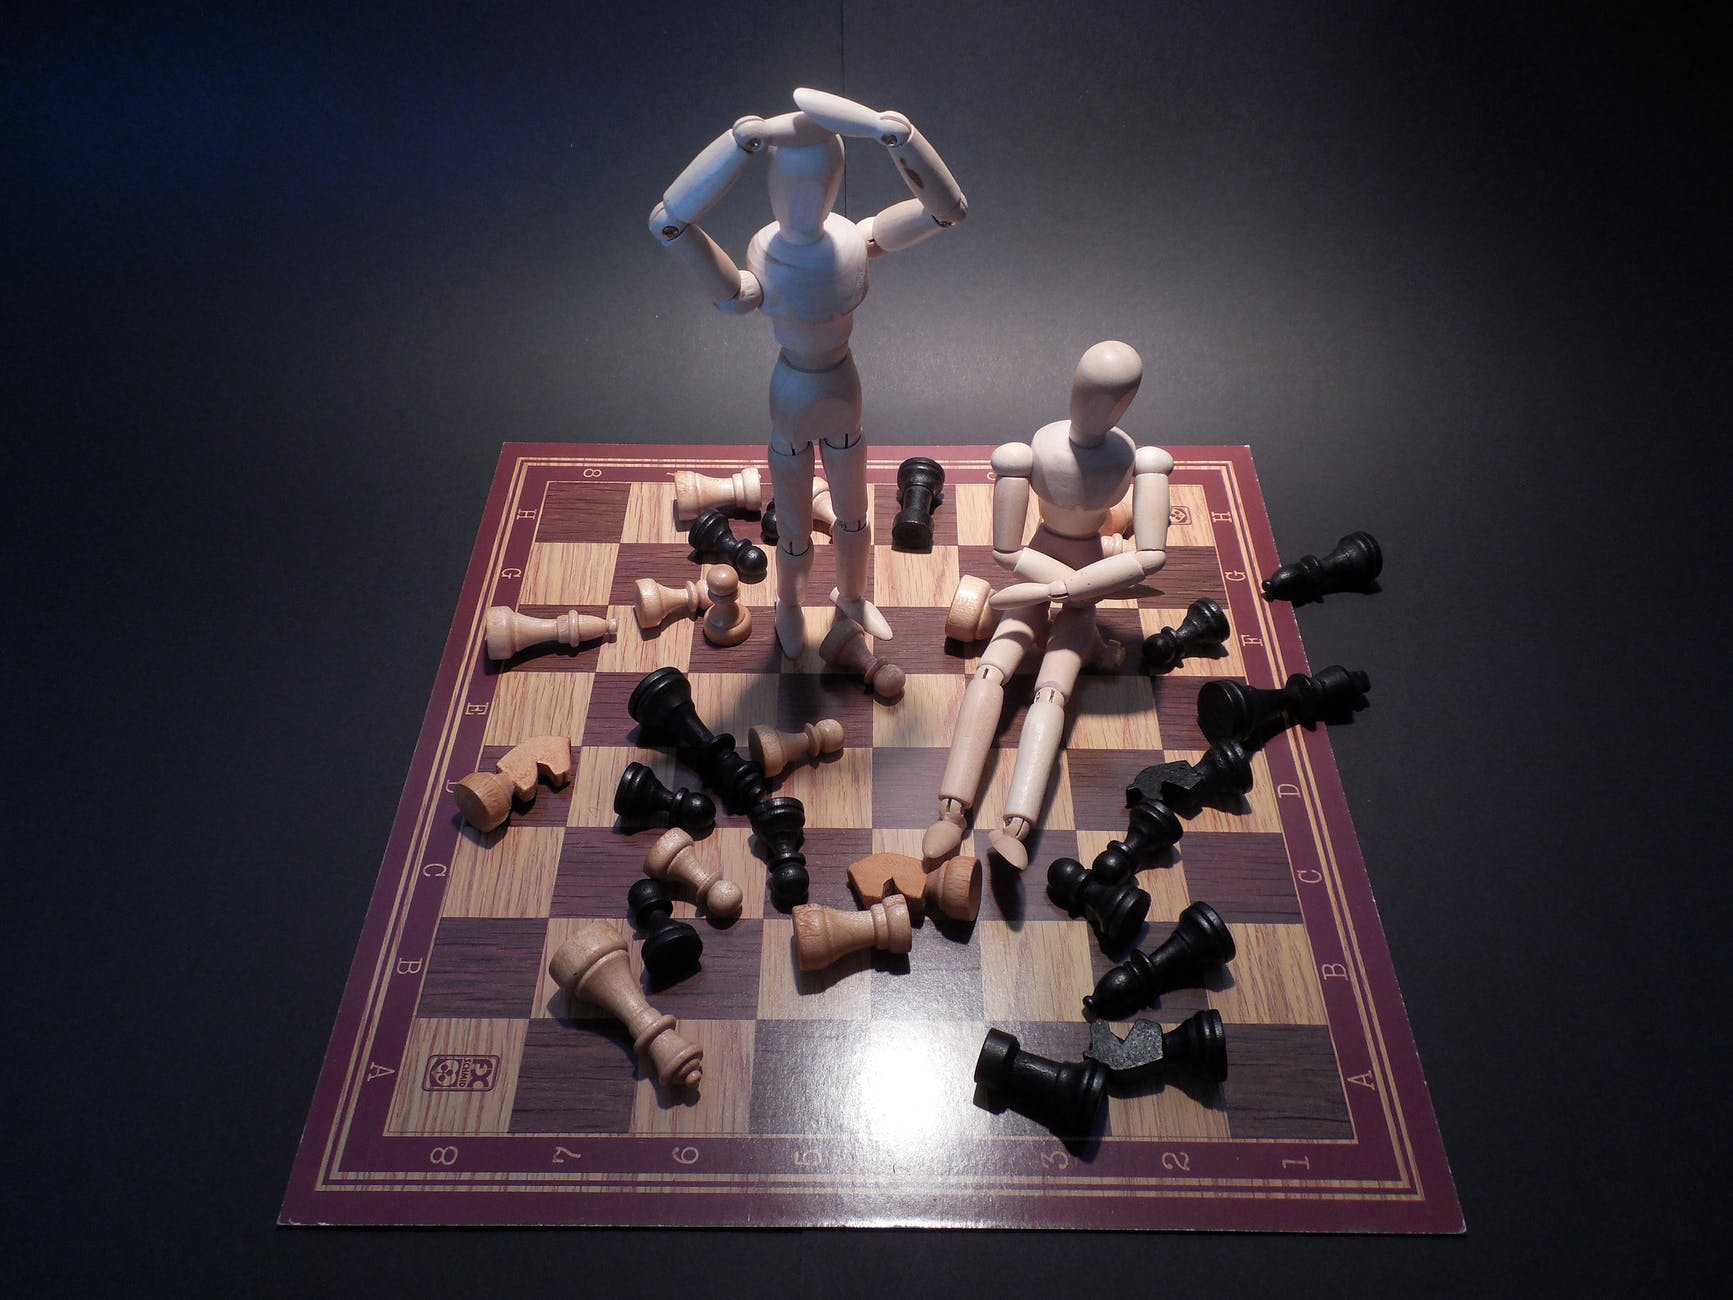 Two white wooden mannequins on a chess board